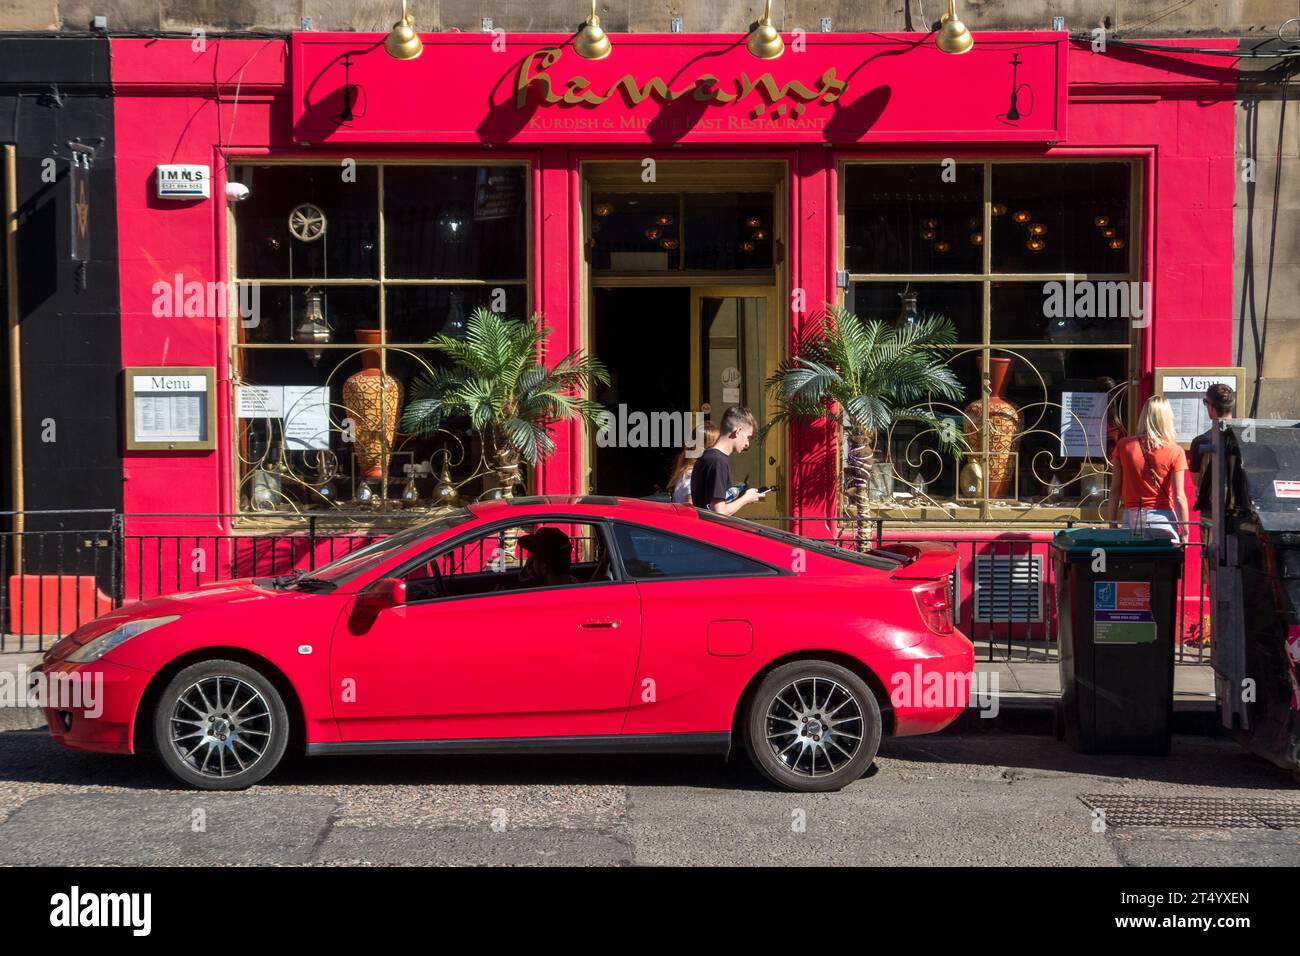 Daika Kurdish Grill with a red car in front of it, 3 Johnston Terrace, Edinburgh EH1 2PW, UK. Stock Photo